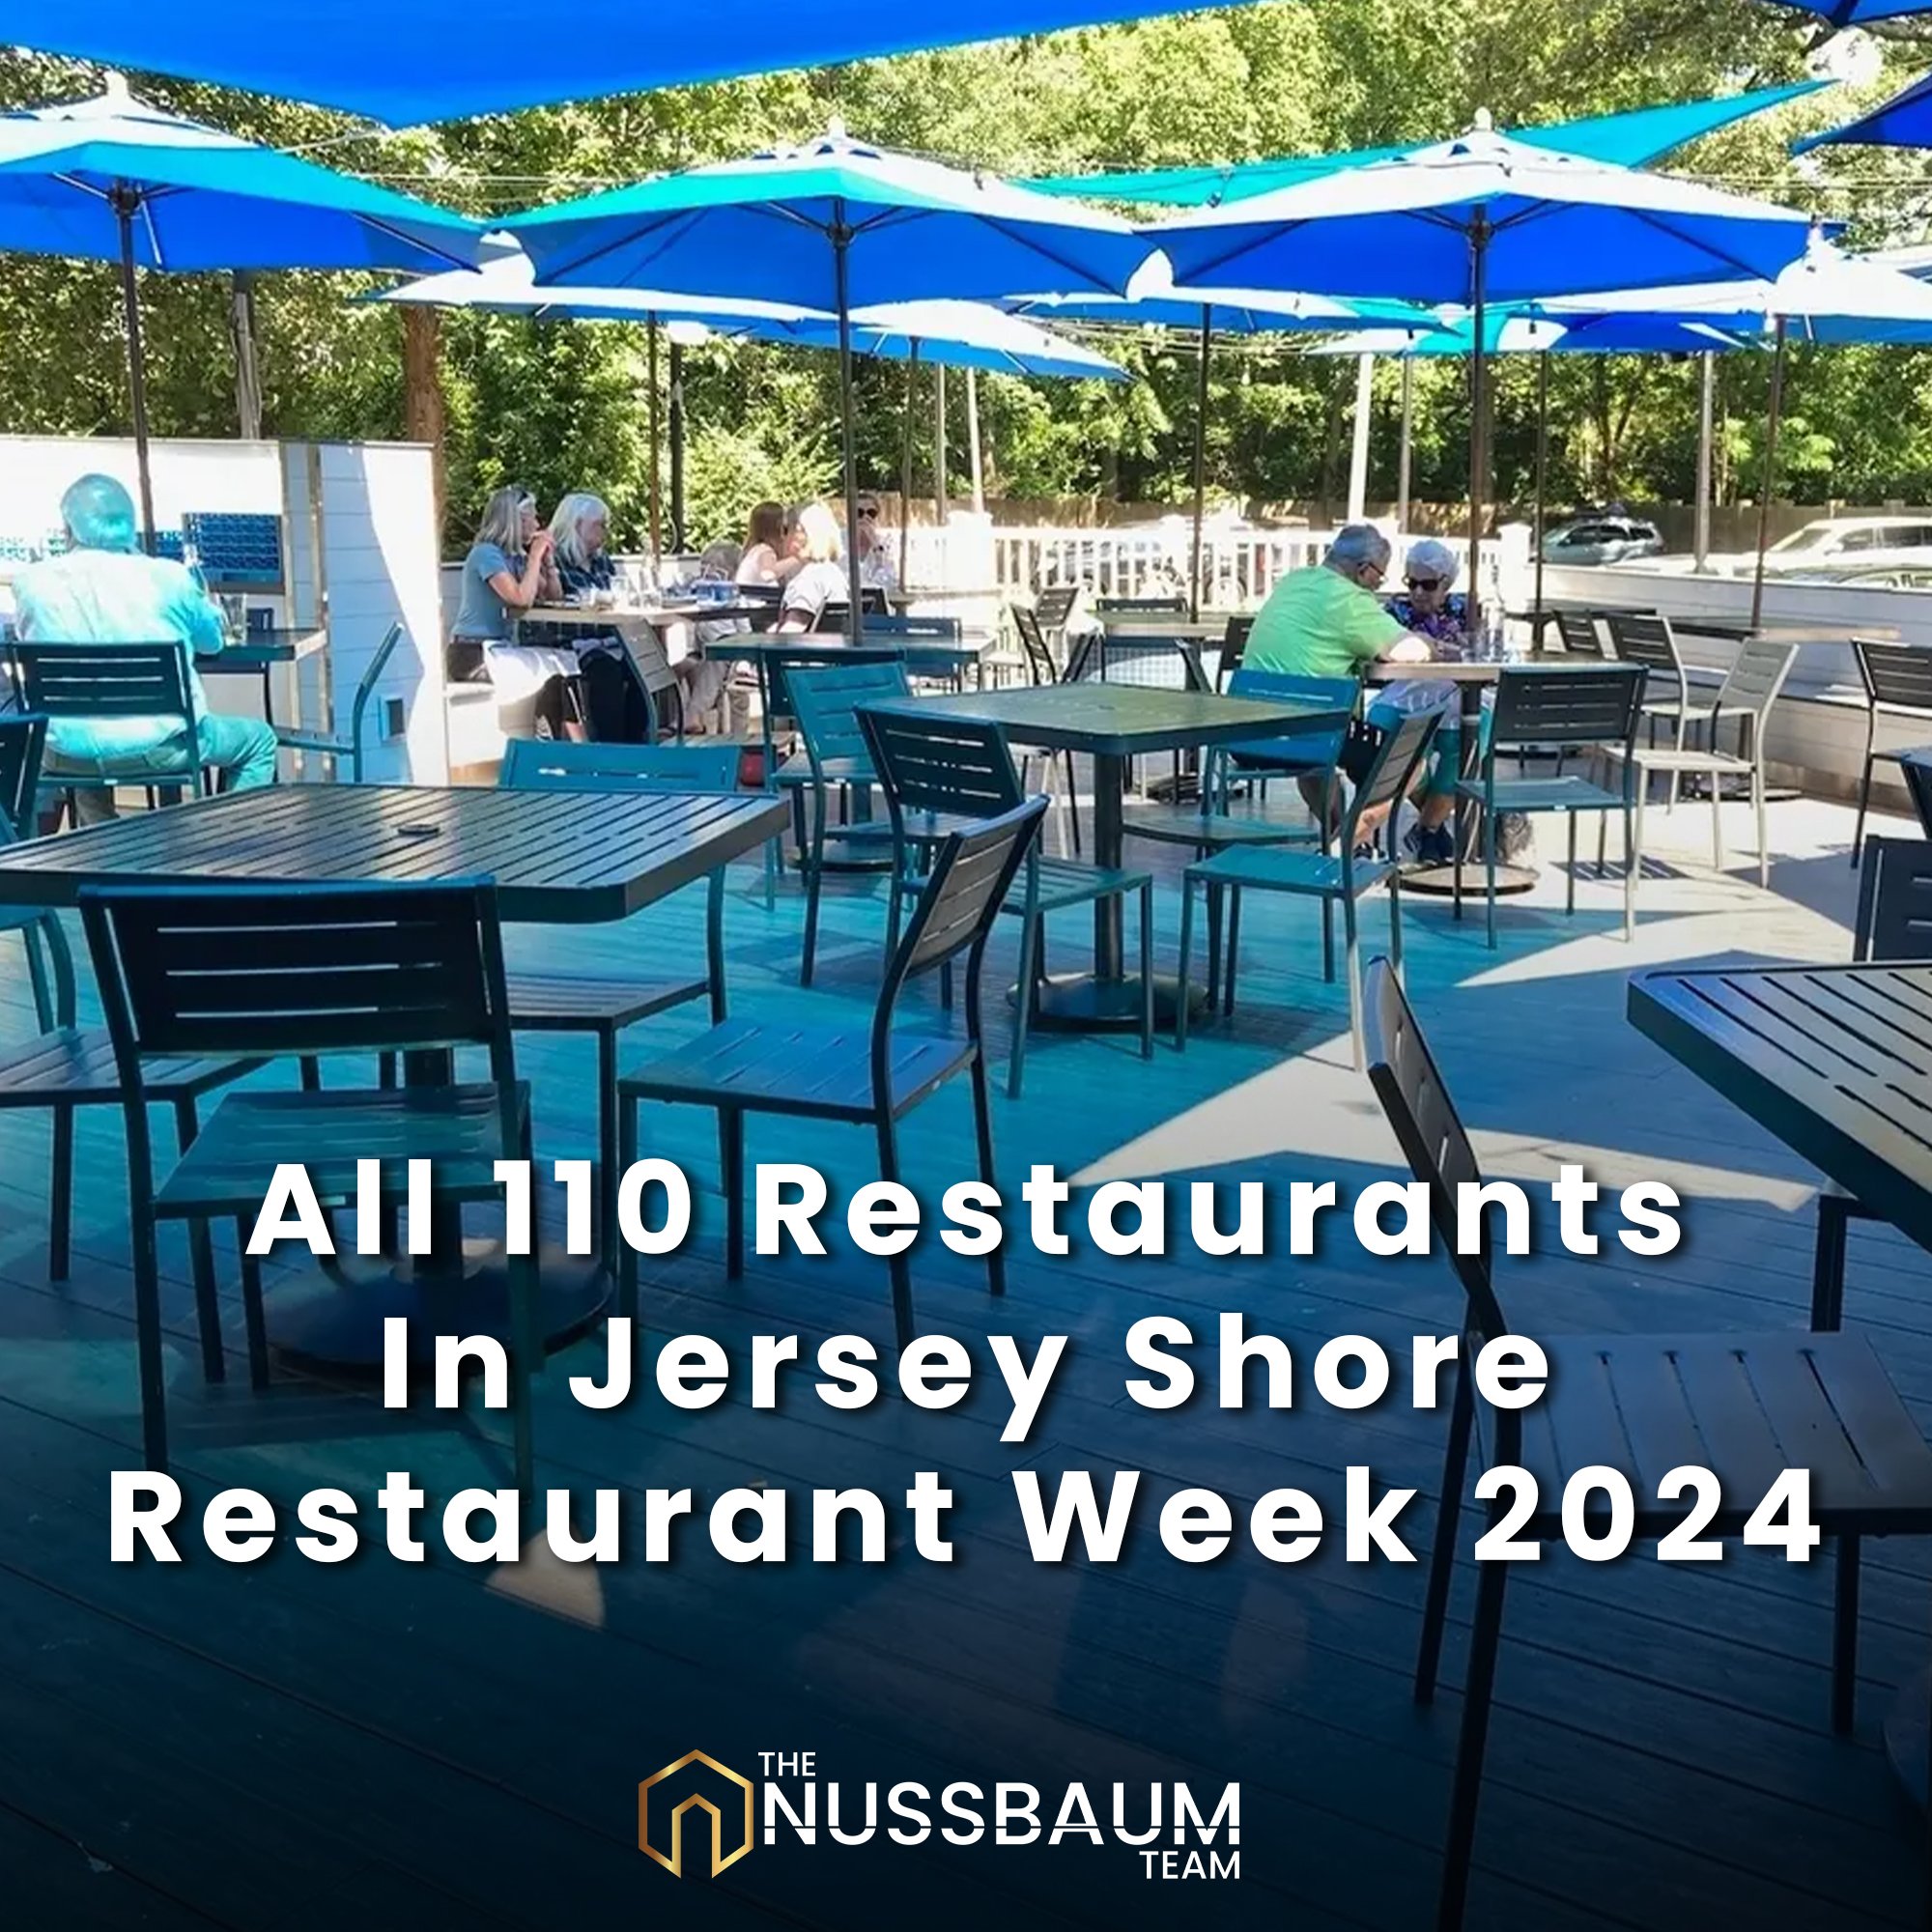 MIDDLETOWN, NJ &mdash; Get ready to lick your lips and enjoy! Jersey Shore Restaurant Week 2024 kicks off this Friday, April 19 and runs through April 28.

Jersey Shore Restaurant Week is now in its 15th year. This year, there are 110 restaurants par